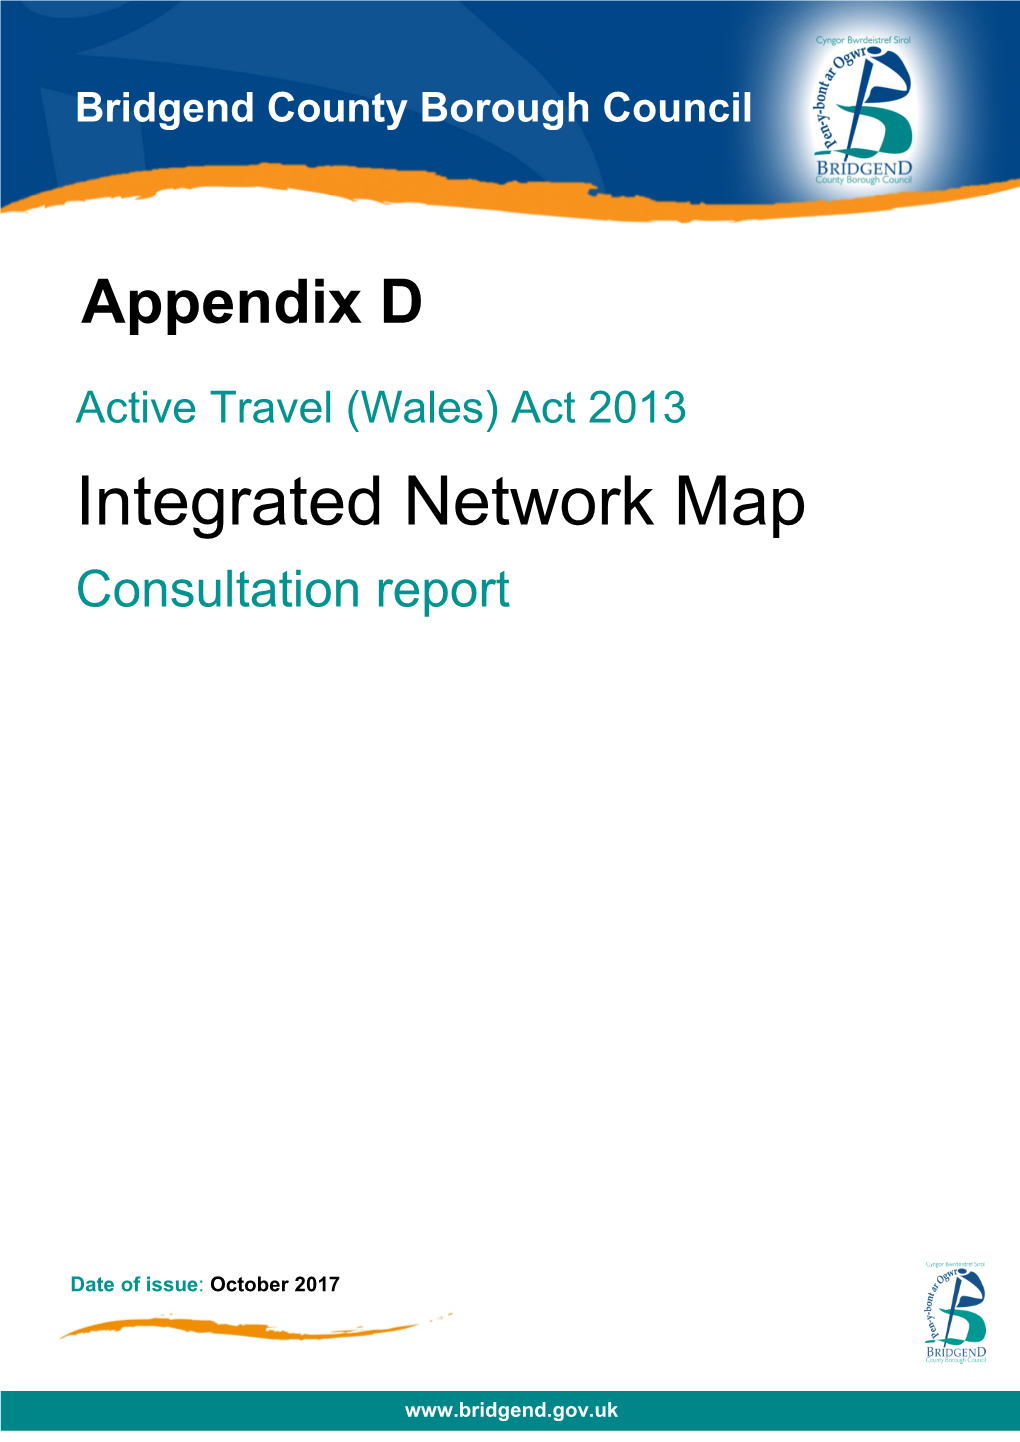 Integrated Network Map Consultation Report